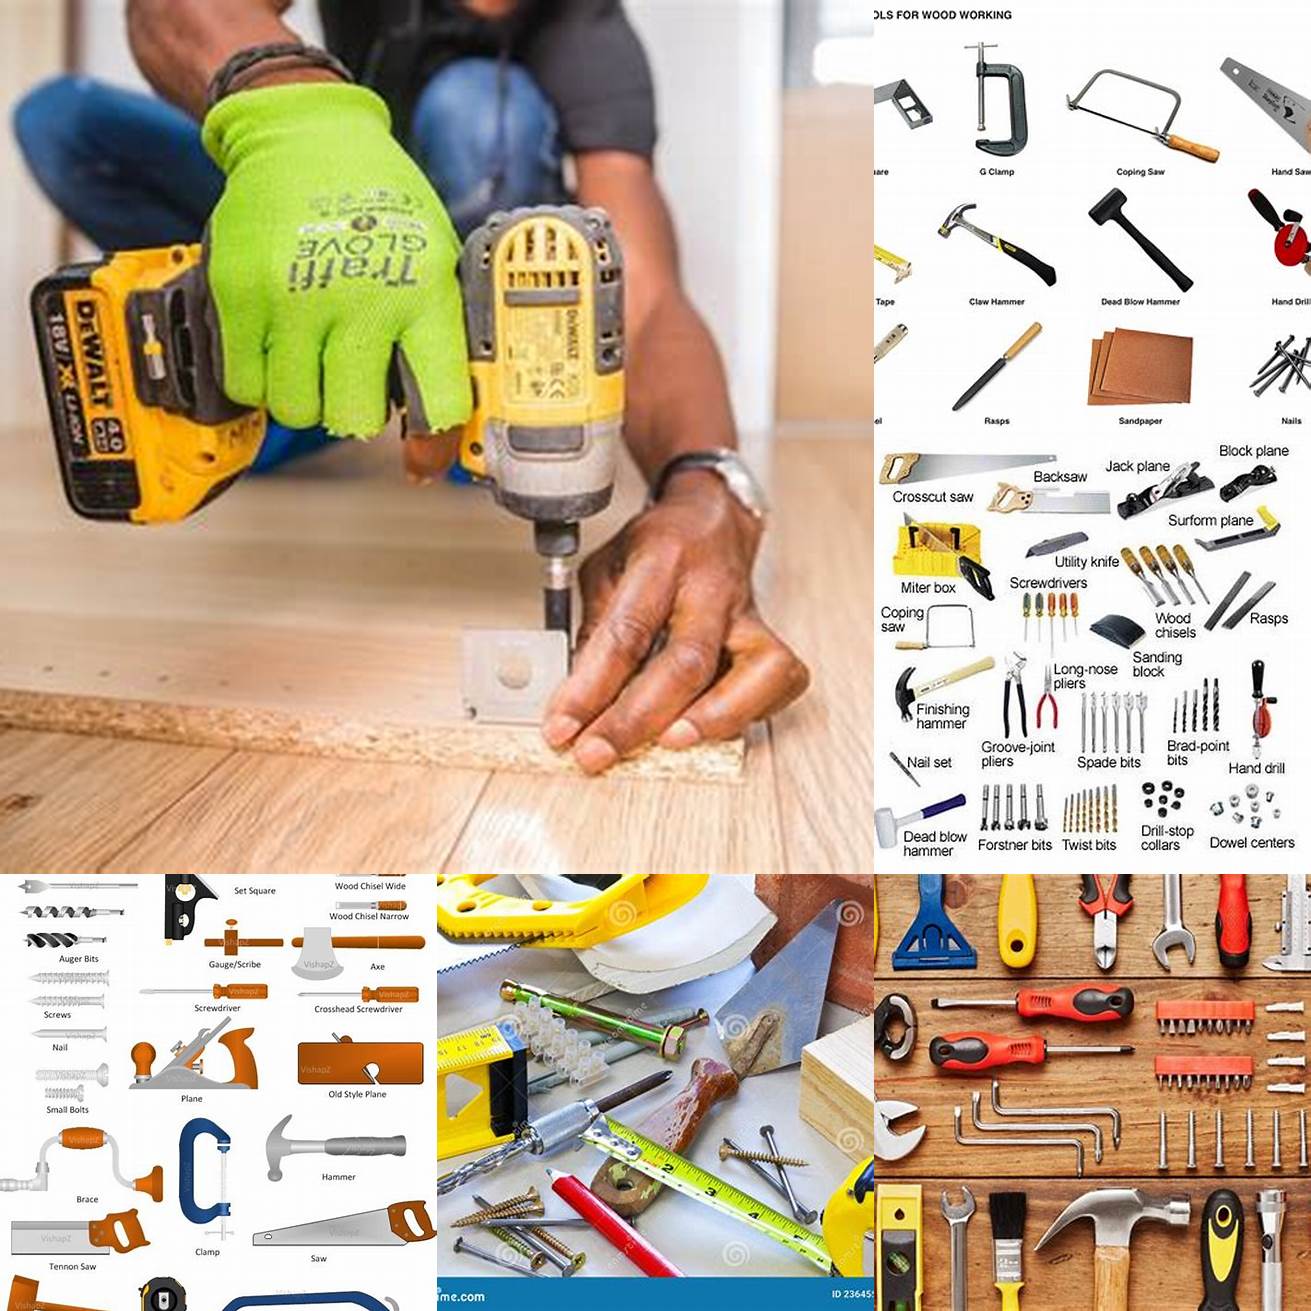 Tools and Materials Building furniture requires a lot of tools and materials which can be expensive This can be a barrier for some people who are interested in woodworking but dont have the resources to invest in the necessary equipment